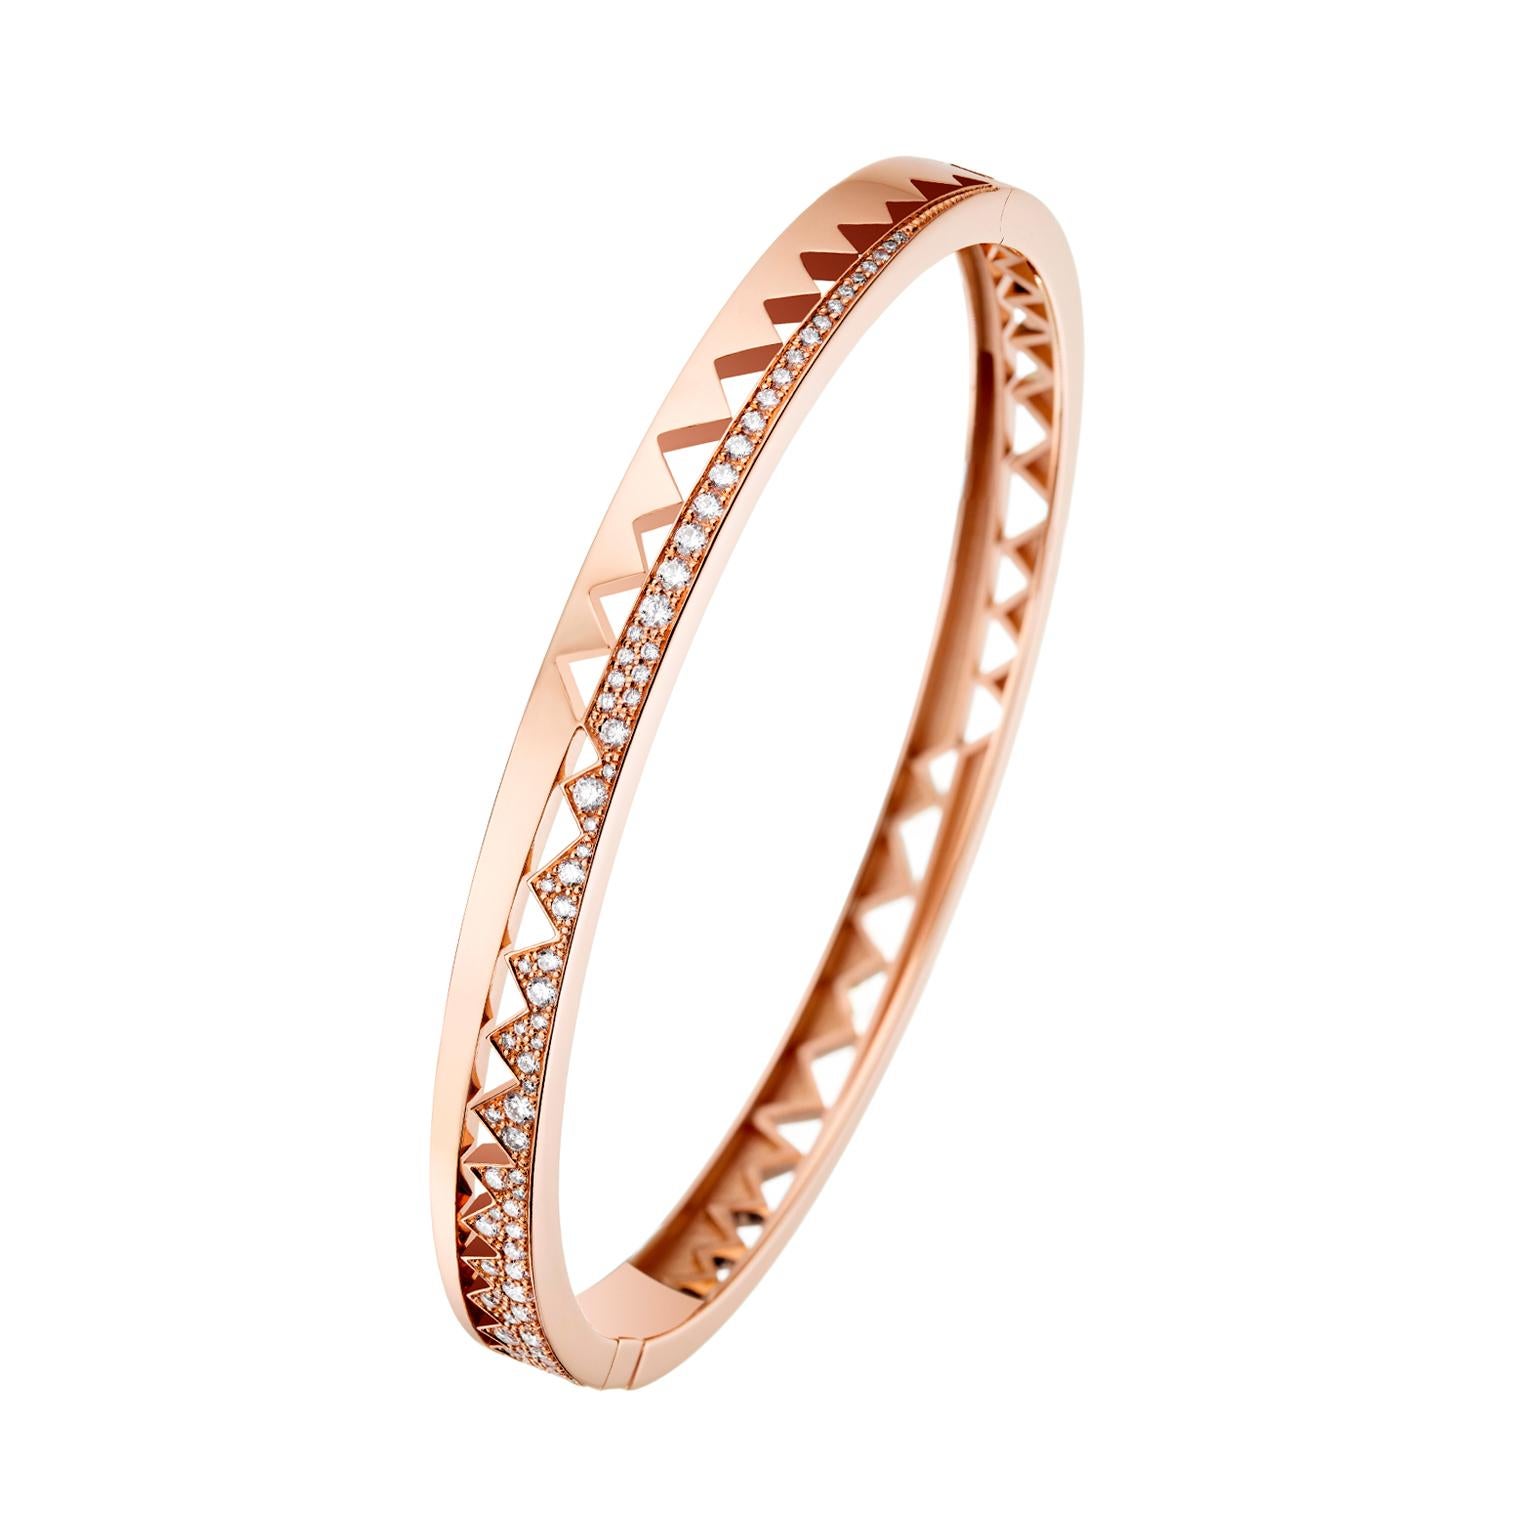 18K rose gold AKILLIS Capture Me bracelet set with white diamonds. Diamonds (cts): 2,186 
The bracelet has two sides: one is fully set with diamonds et another one is half-set, offering a sophisticated and dynamic look. 

The new AKILLIS collection